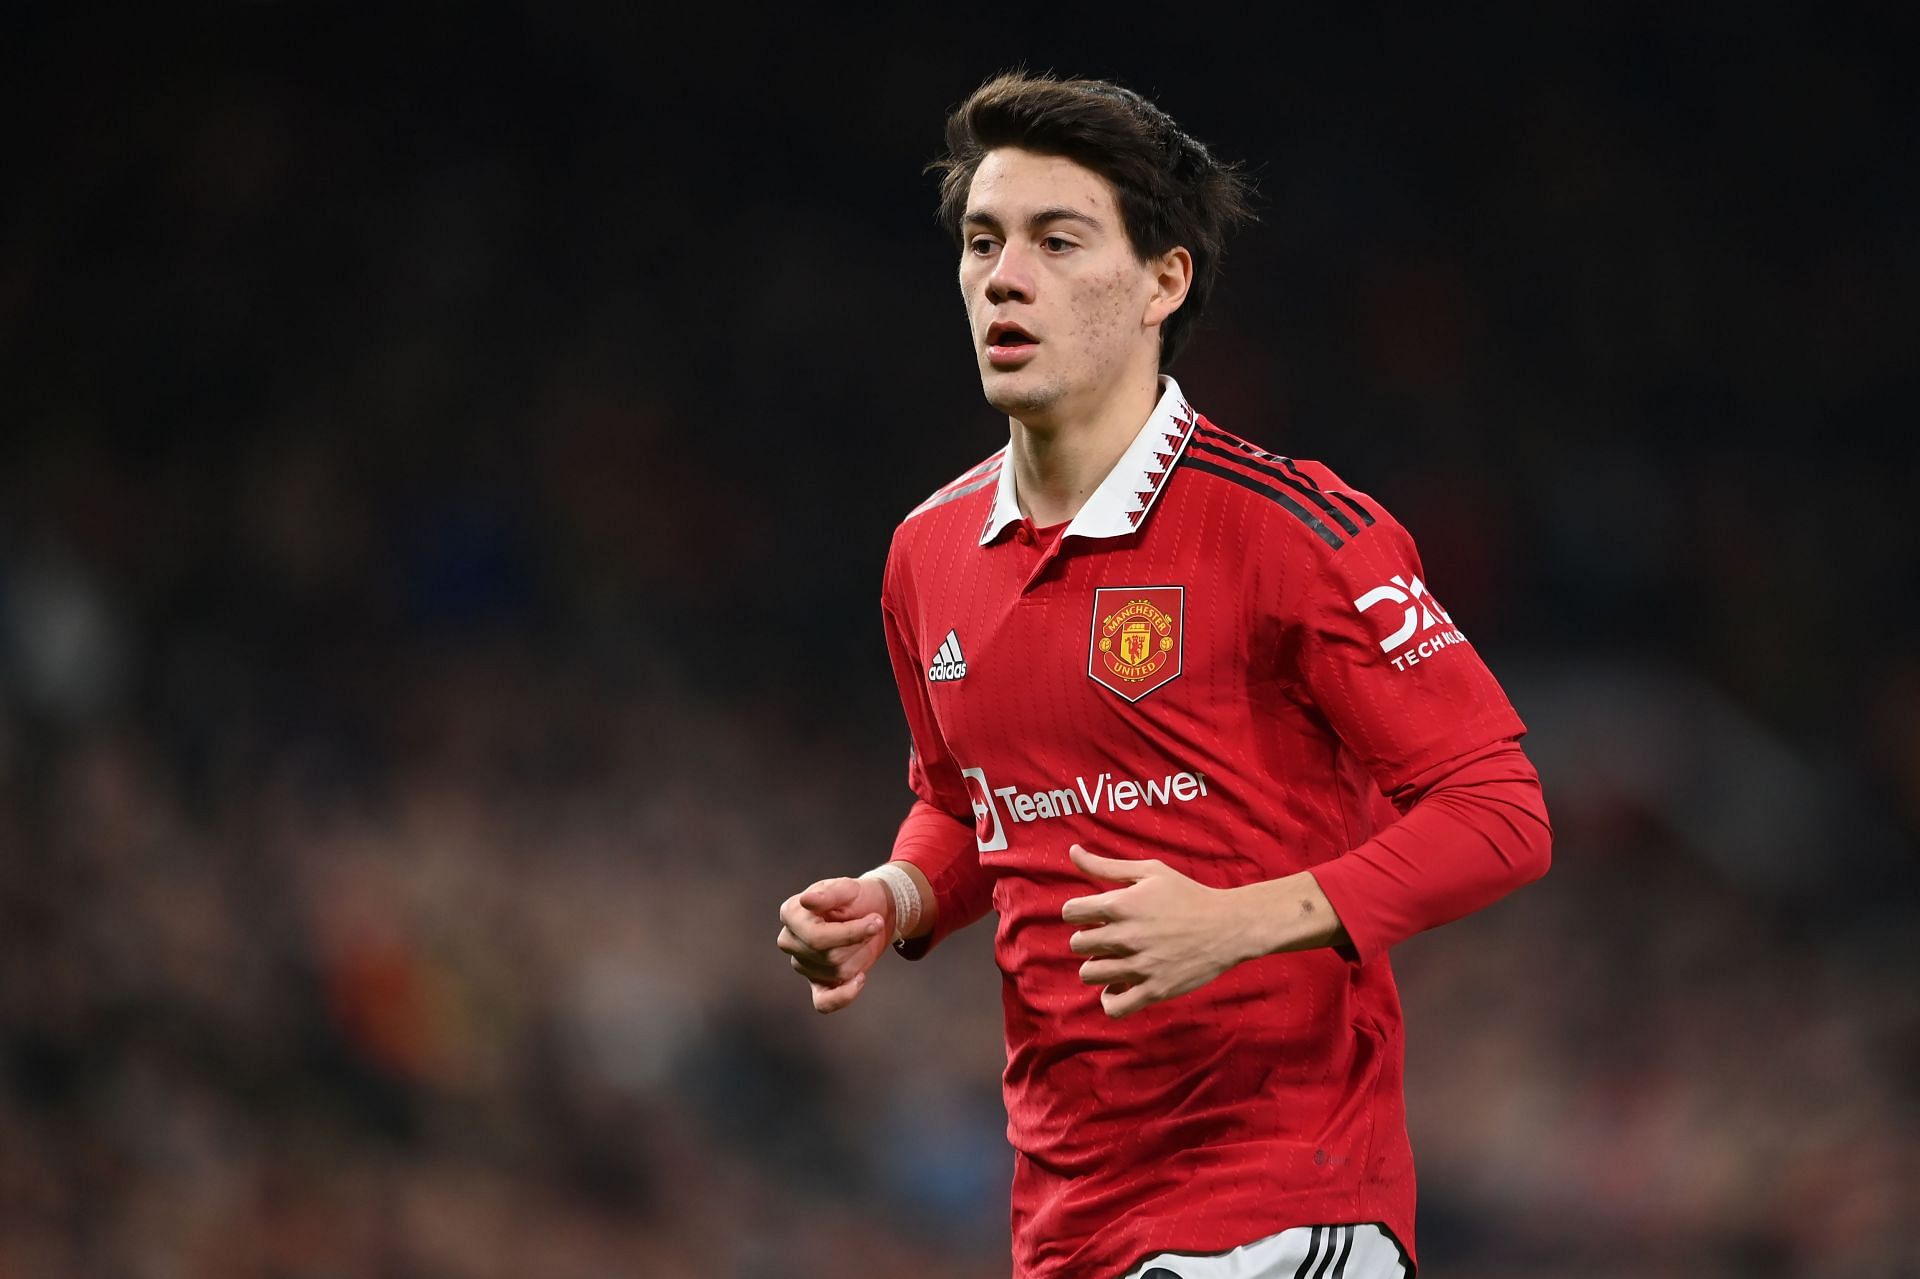 Peillistri played 31 minutes in United&#039;s 2-2 league draw vs Leeds this season.